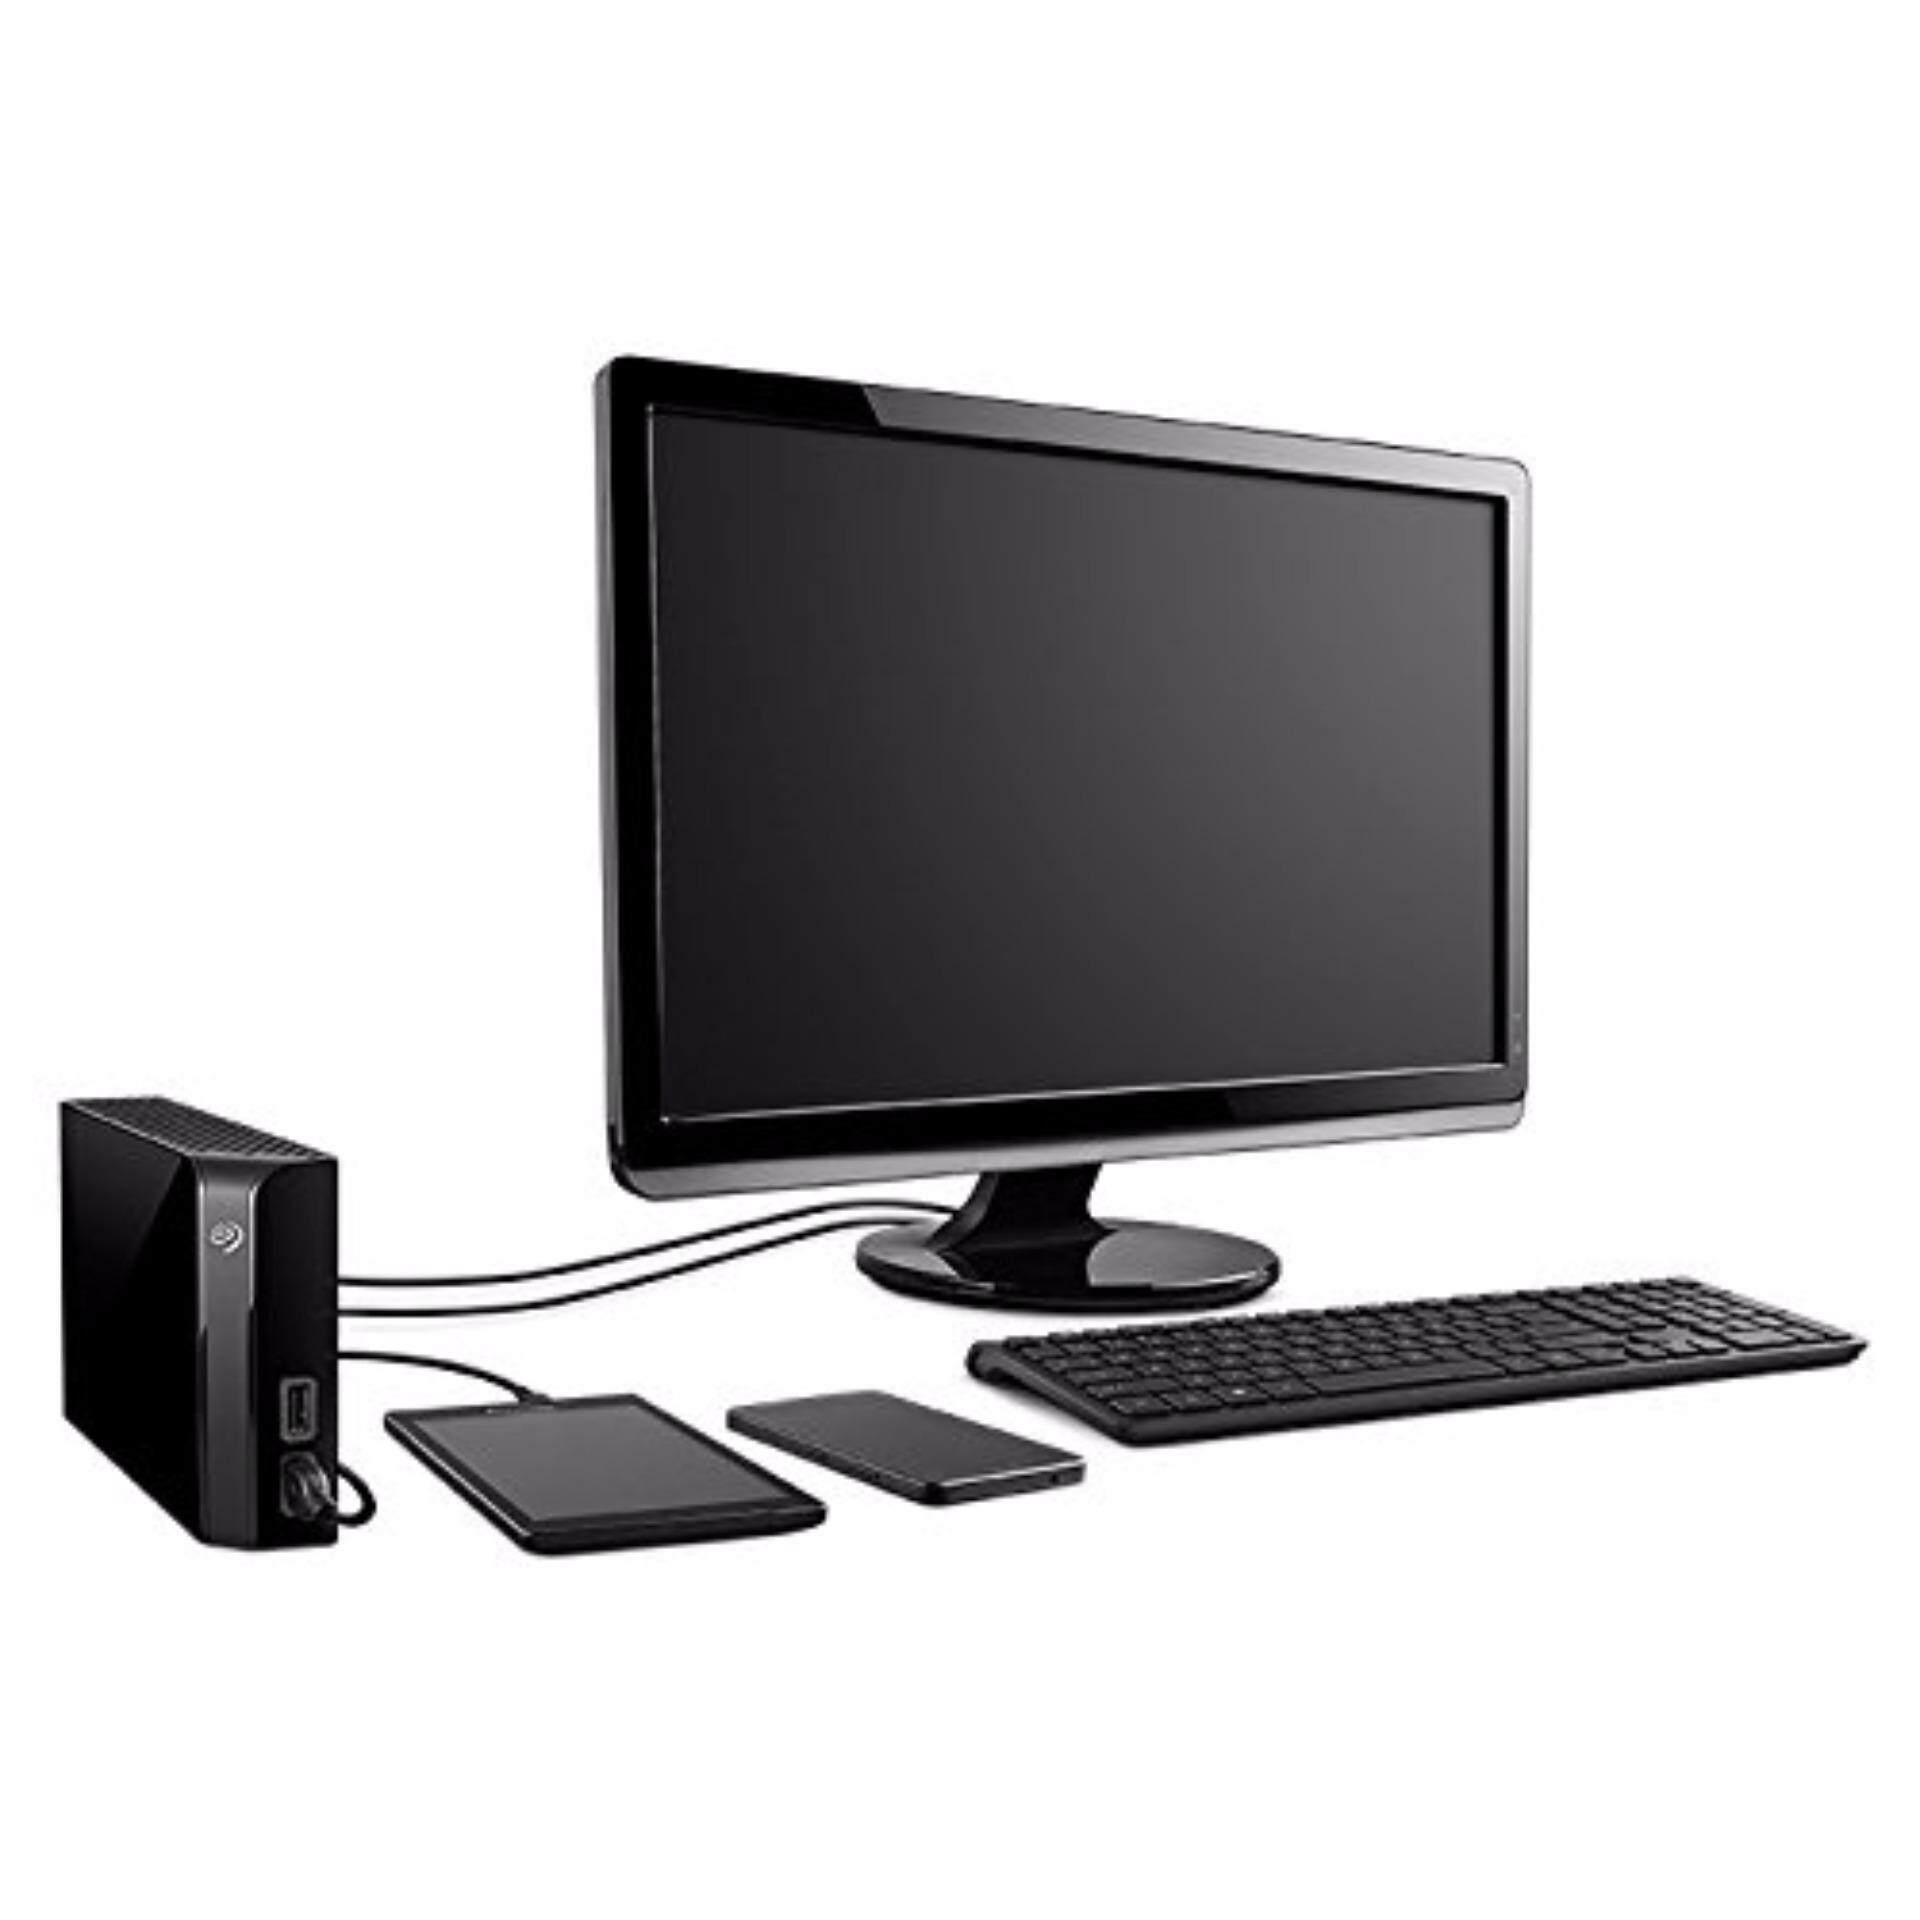 Seagate Backup Plus Desktop Hub 6TB (Up to 160 MB/s) with Integrated USB 3.0 Back up & Charge Hub Downloadable Seagate Backup Software Mac & Windows Compatible external hard disk